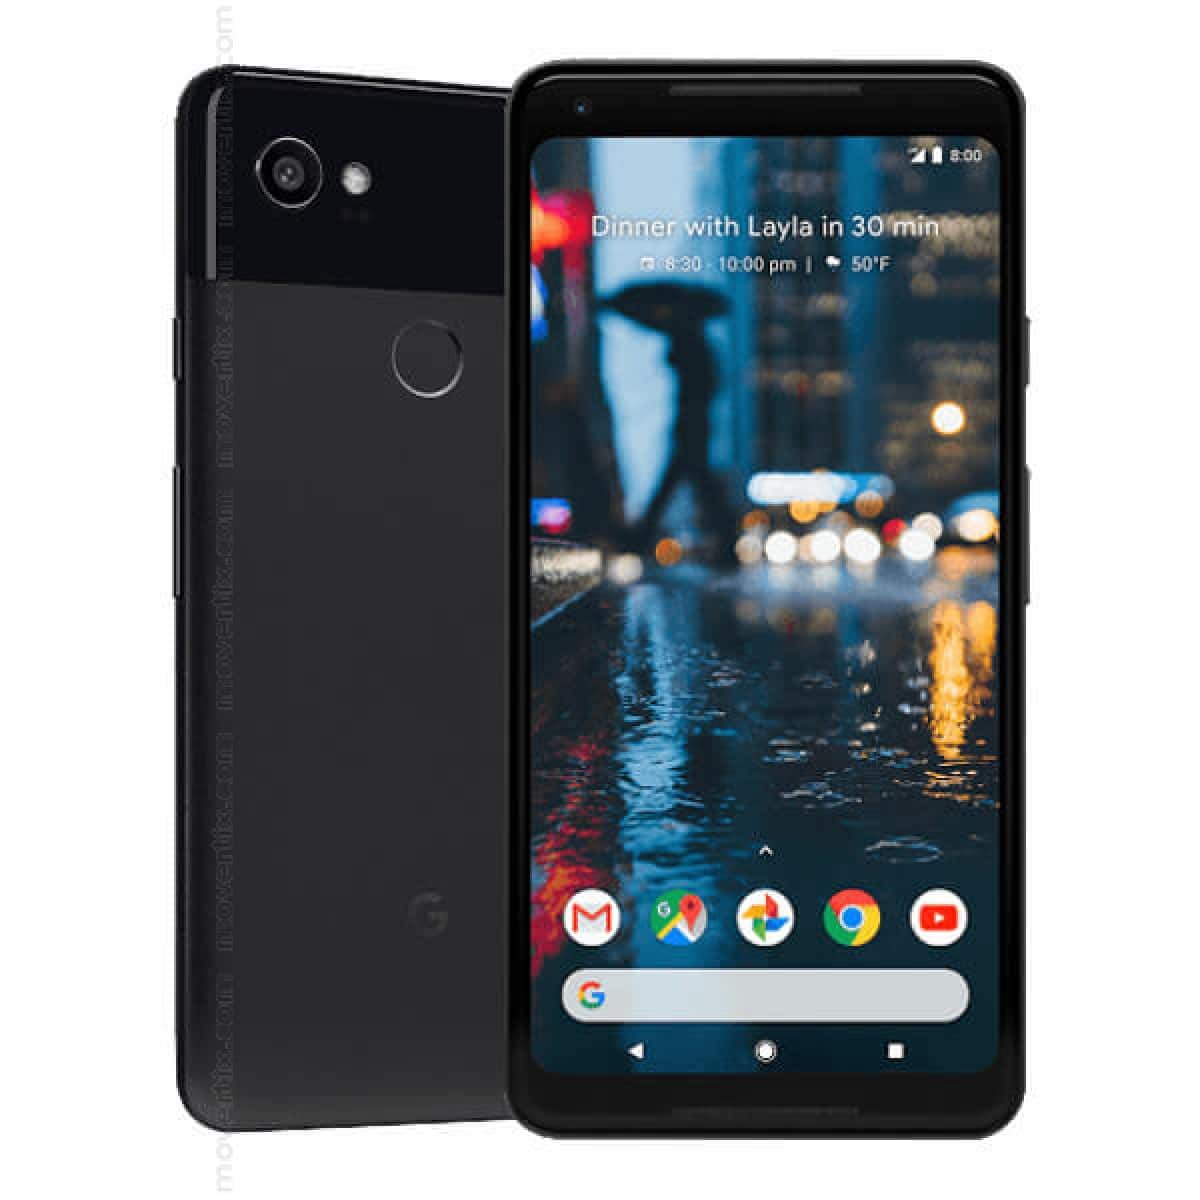 LineageOS 17.1 ROM for Pixel 2 XL